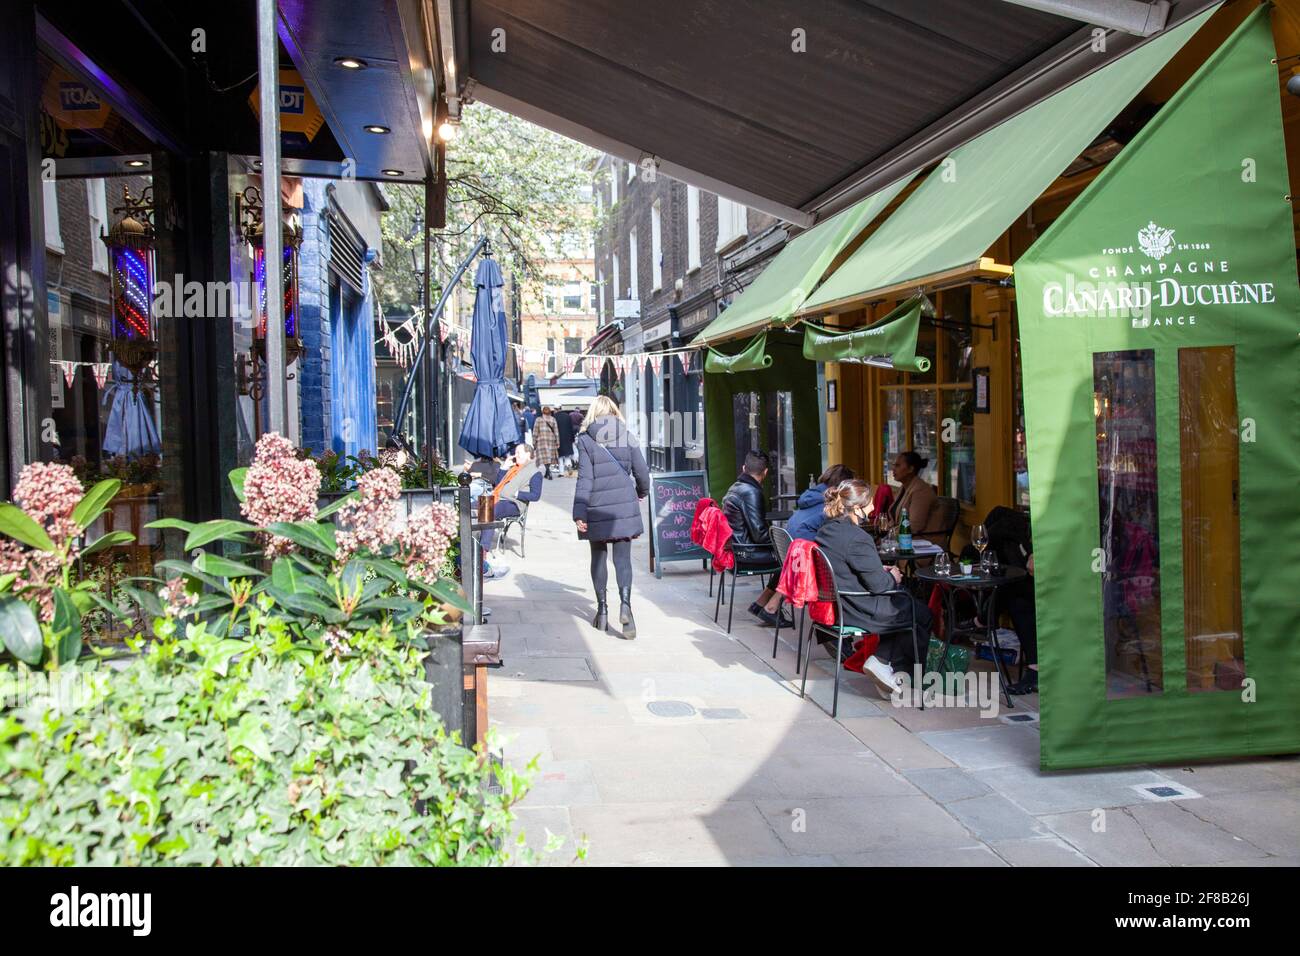 First Day after Lockdown, 12 April 2021, People Drining and Dining on Shepherds Walk, W1 - London UK Stock Photo